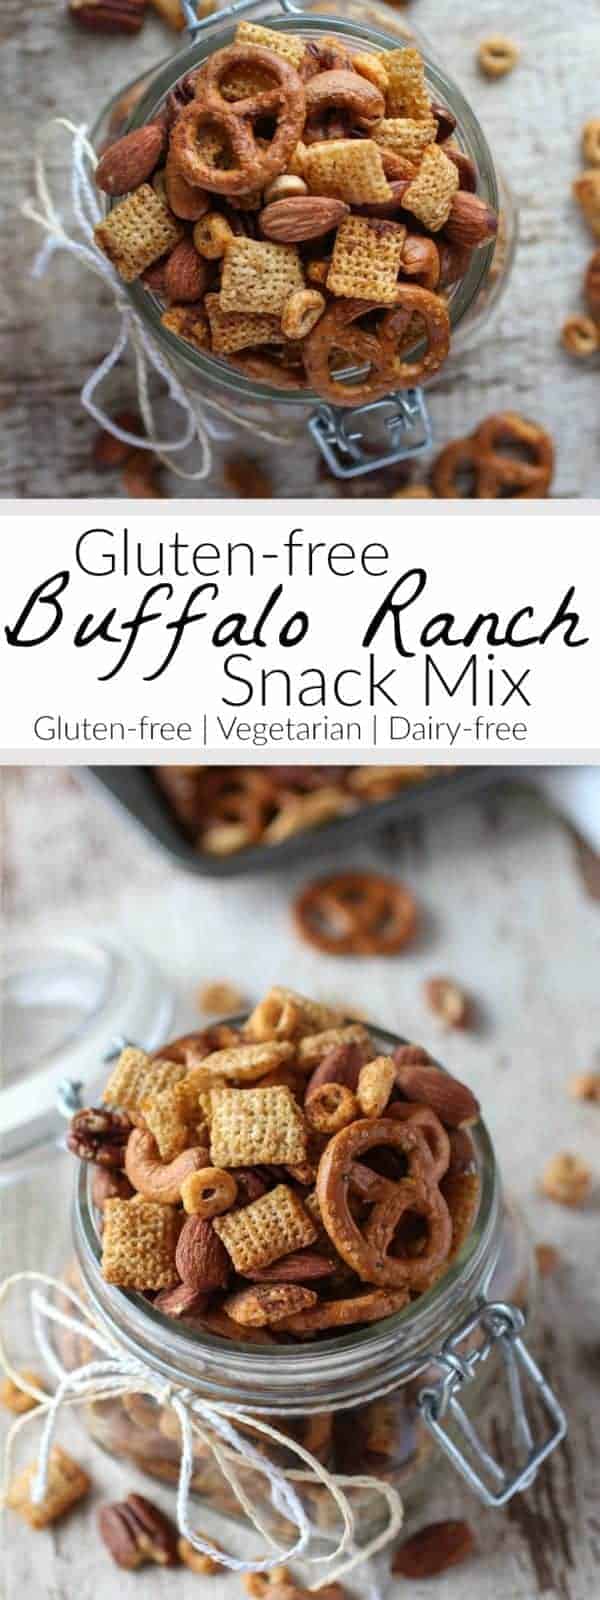 Gluten-free Buffalo Raach Snack Mix is made delicious with a blend of gluten-free cereals, gluten-free pretzels, mixed nuts, ghee, ranch seasonings and buffalo wing sauce. Perfect for parties, picnics and get togethers. Gluten-free | Dairy-free | therealfoodrds.com